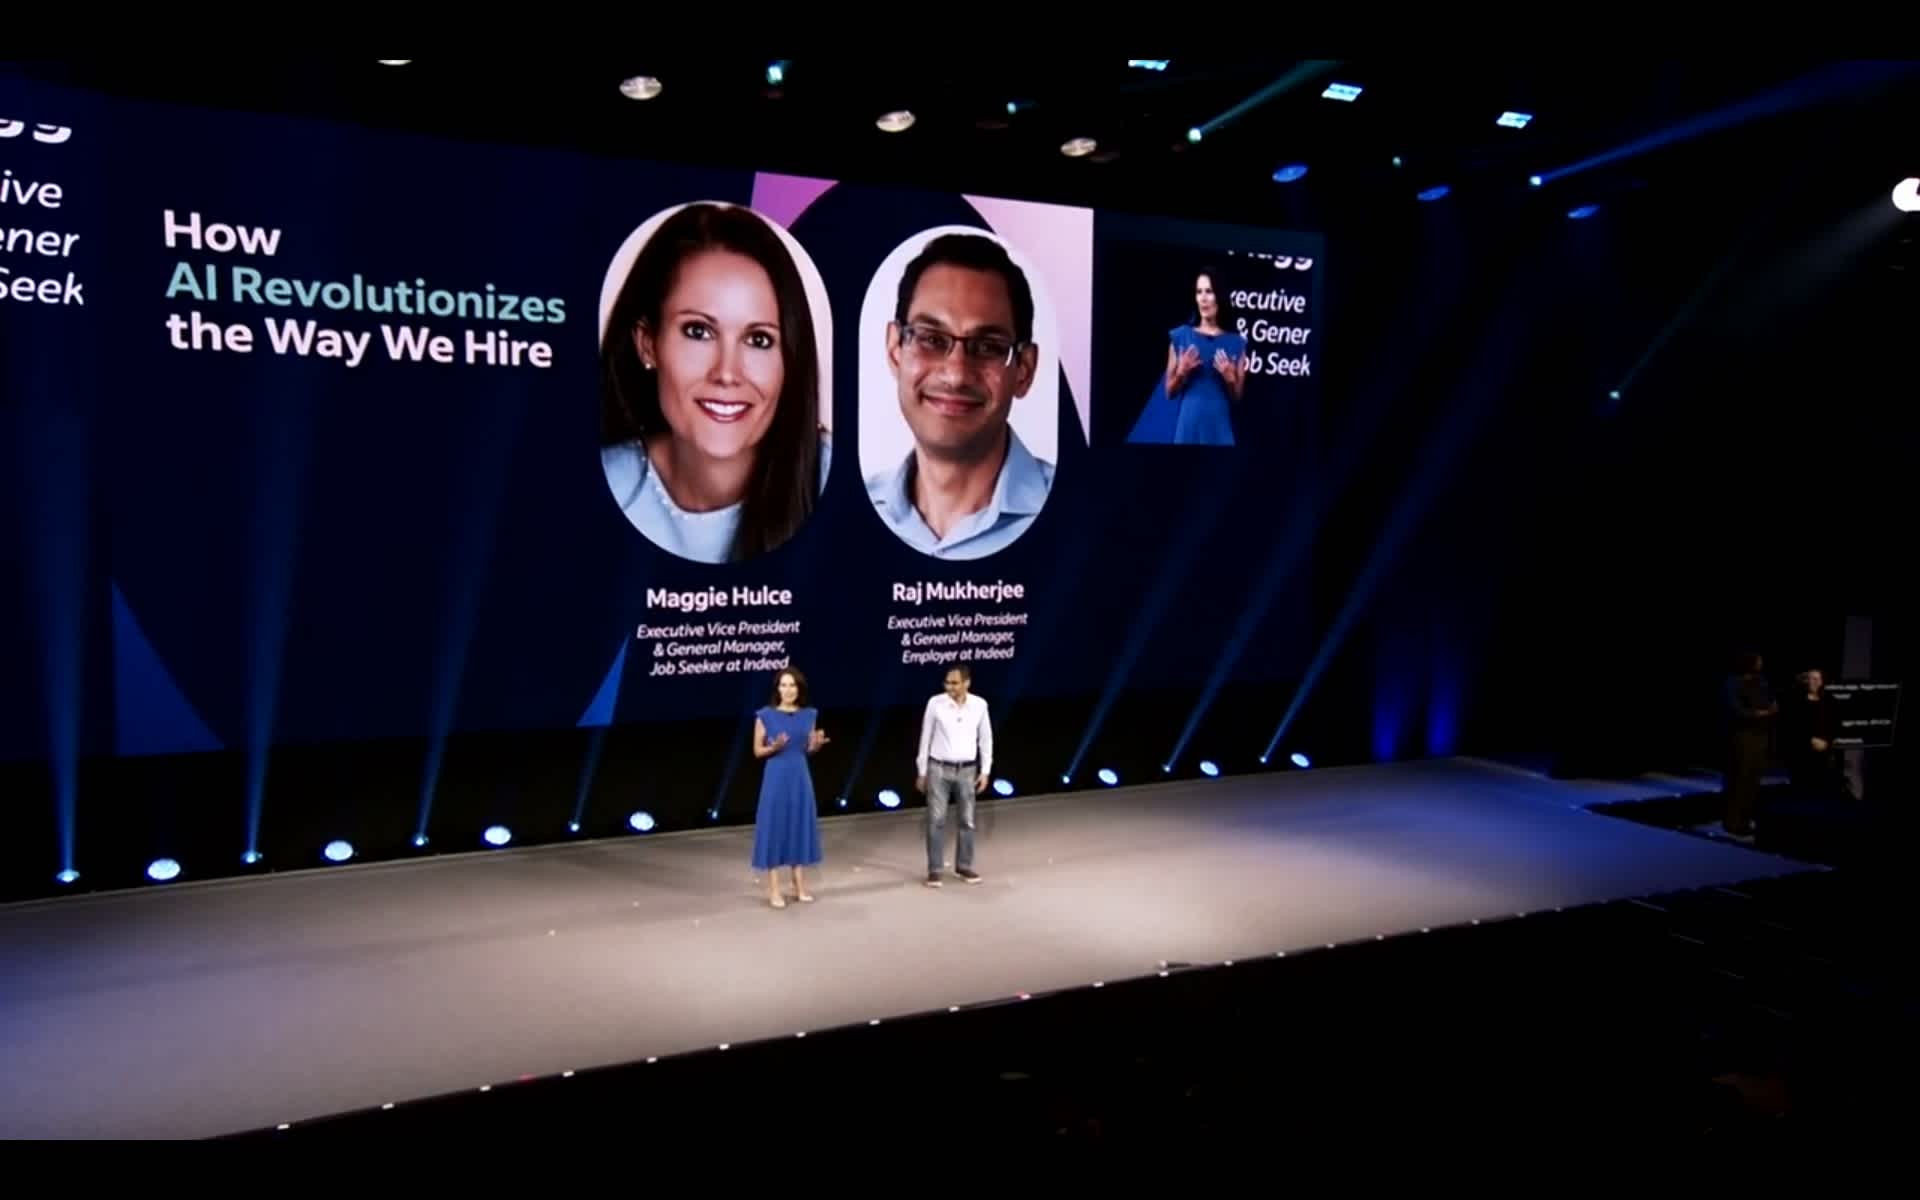 Maggie Hulce, executive vice president and general manager of Enterprise at Indeed, and Raj Mukherjee, executive vice president and general manager for Employer at Indeed giving a speech